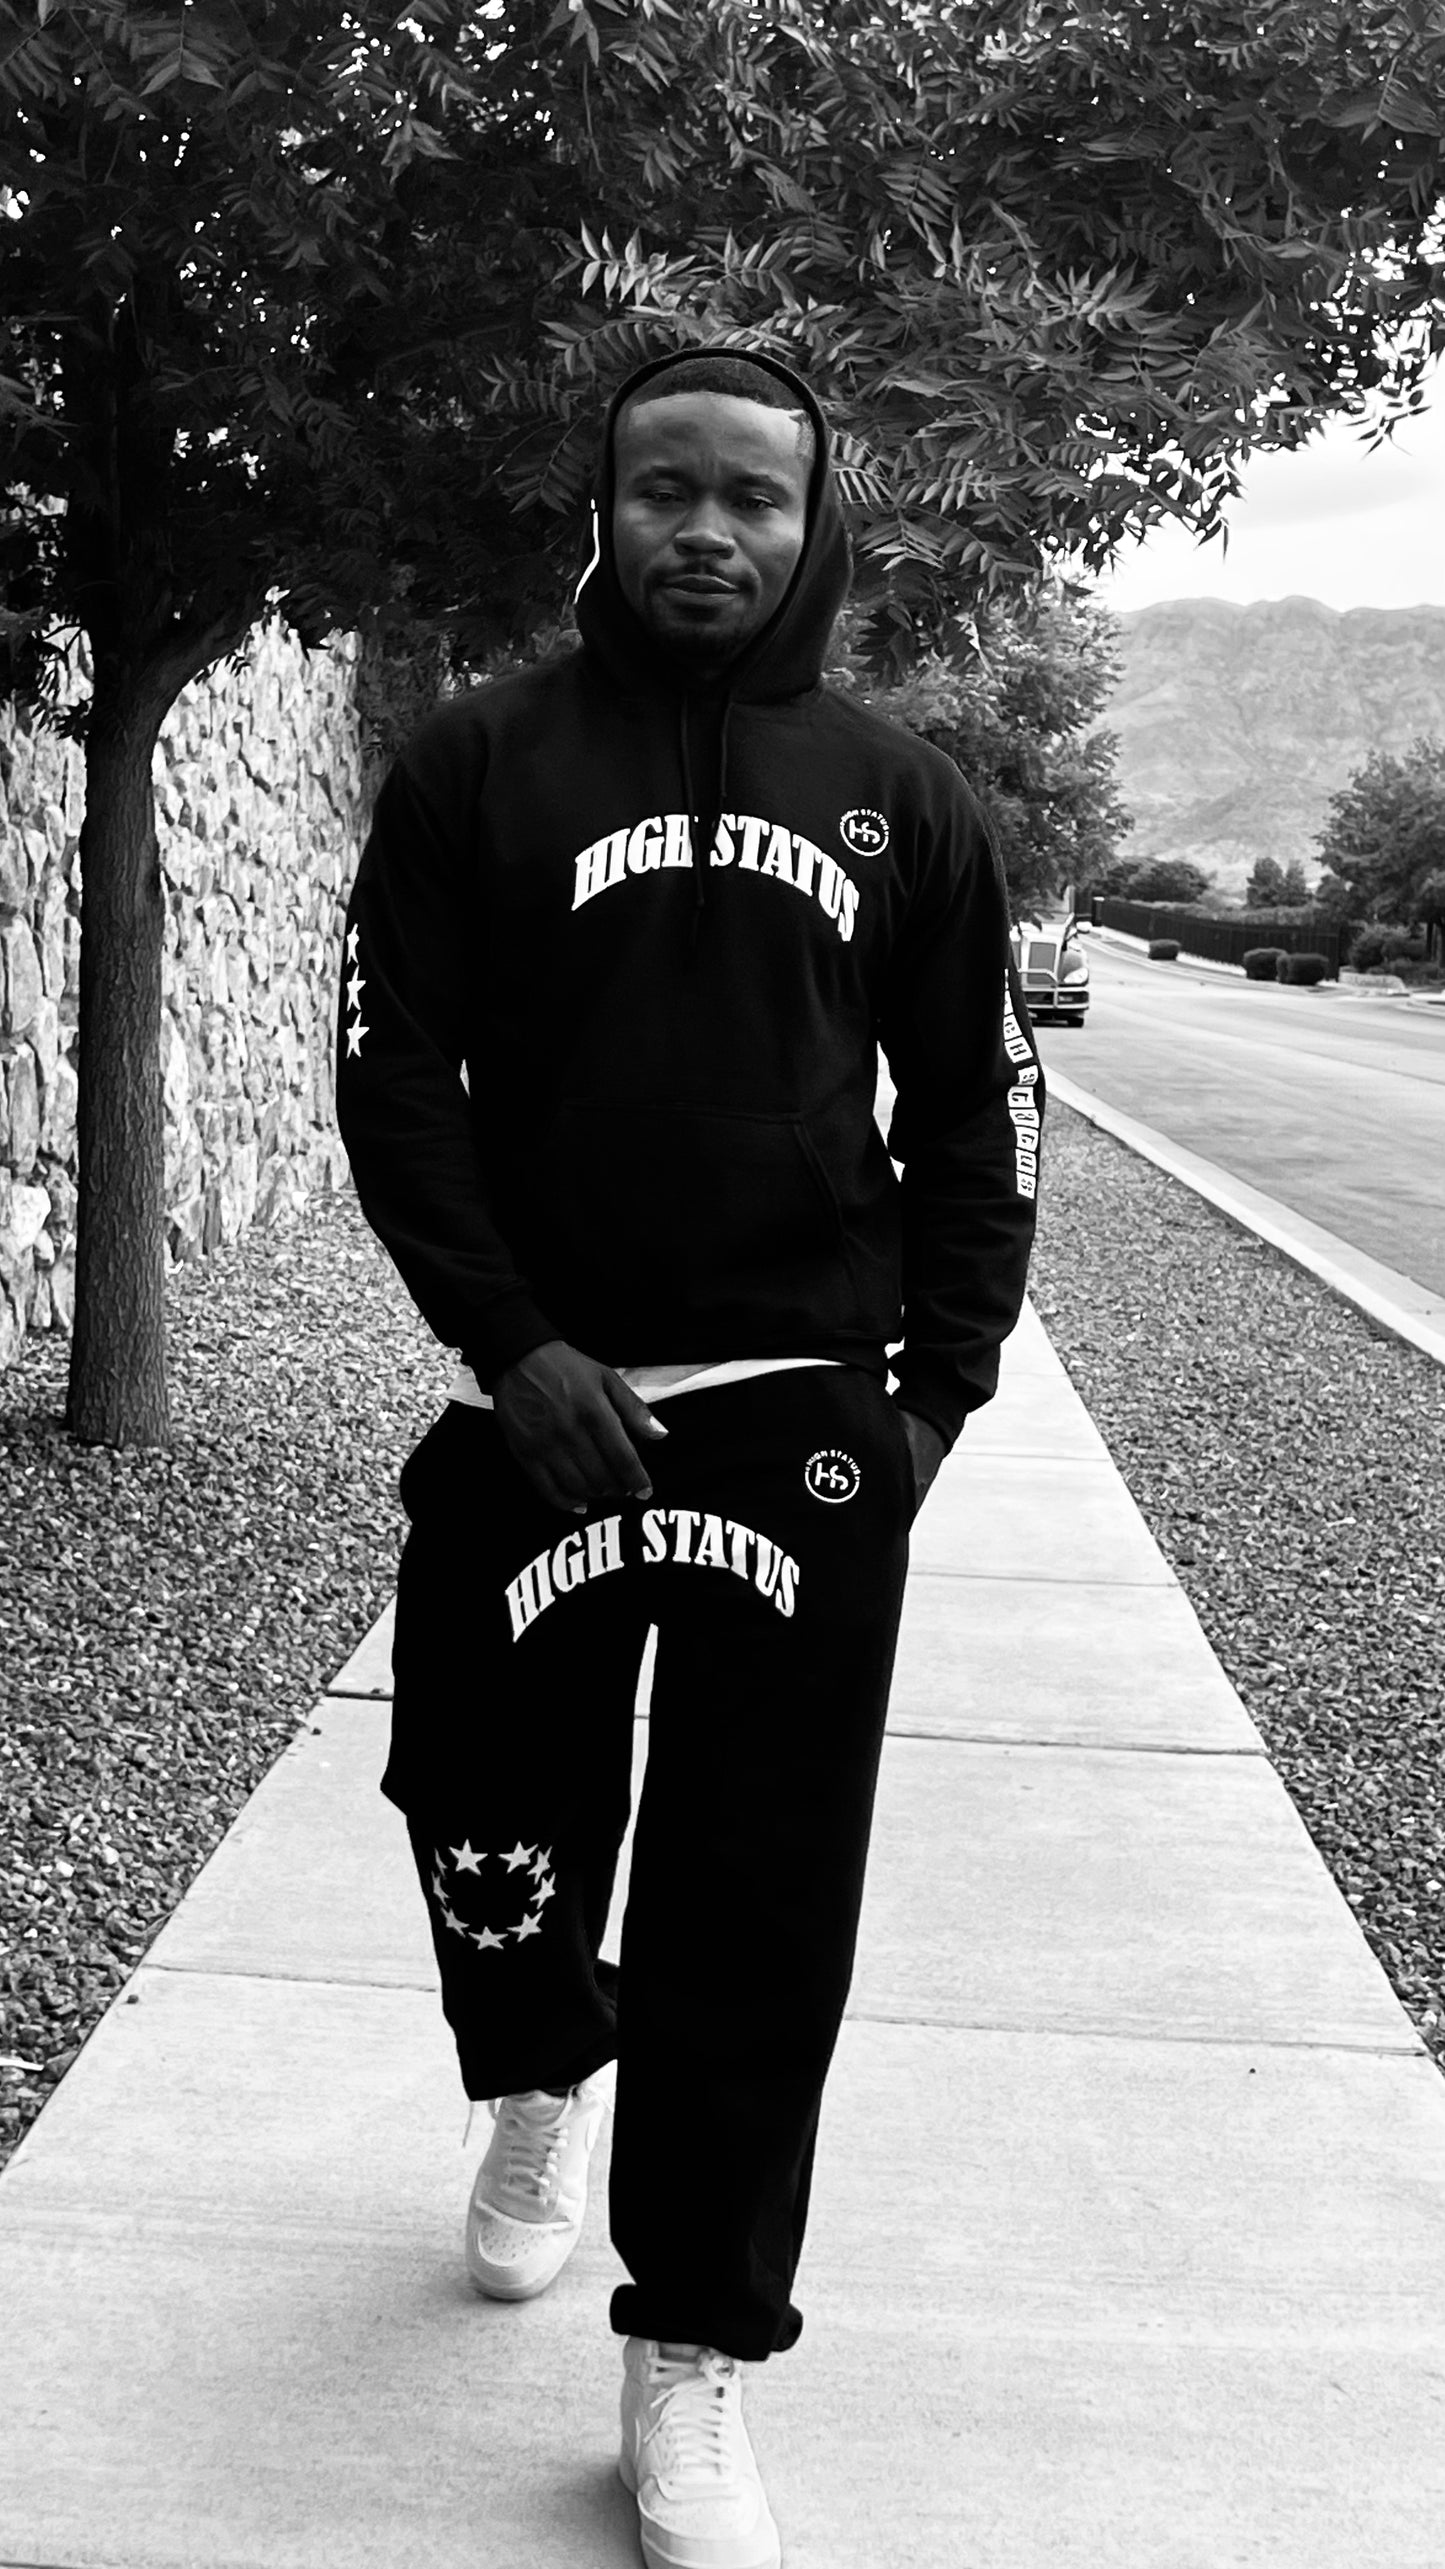 HIGH STATUS "ARCH STARS"  HODIE,BAGGY PANTS TRACK SUIT